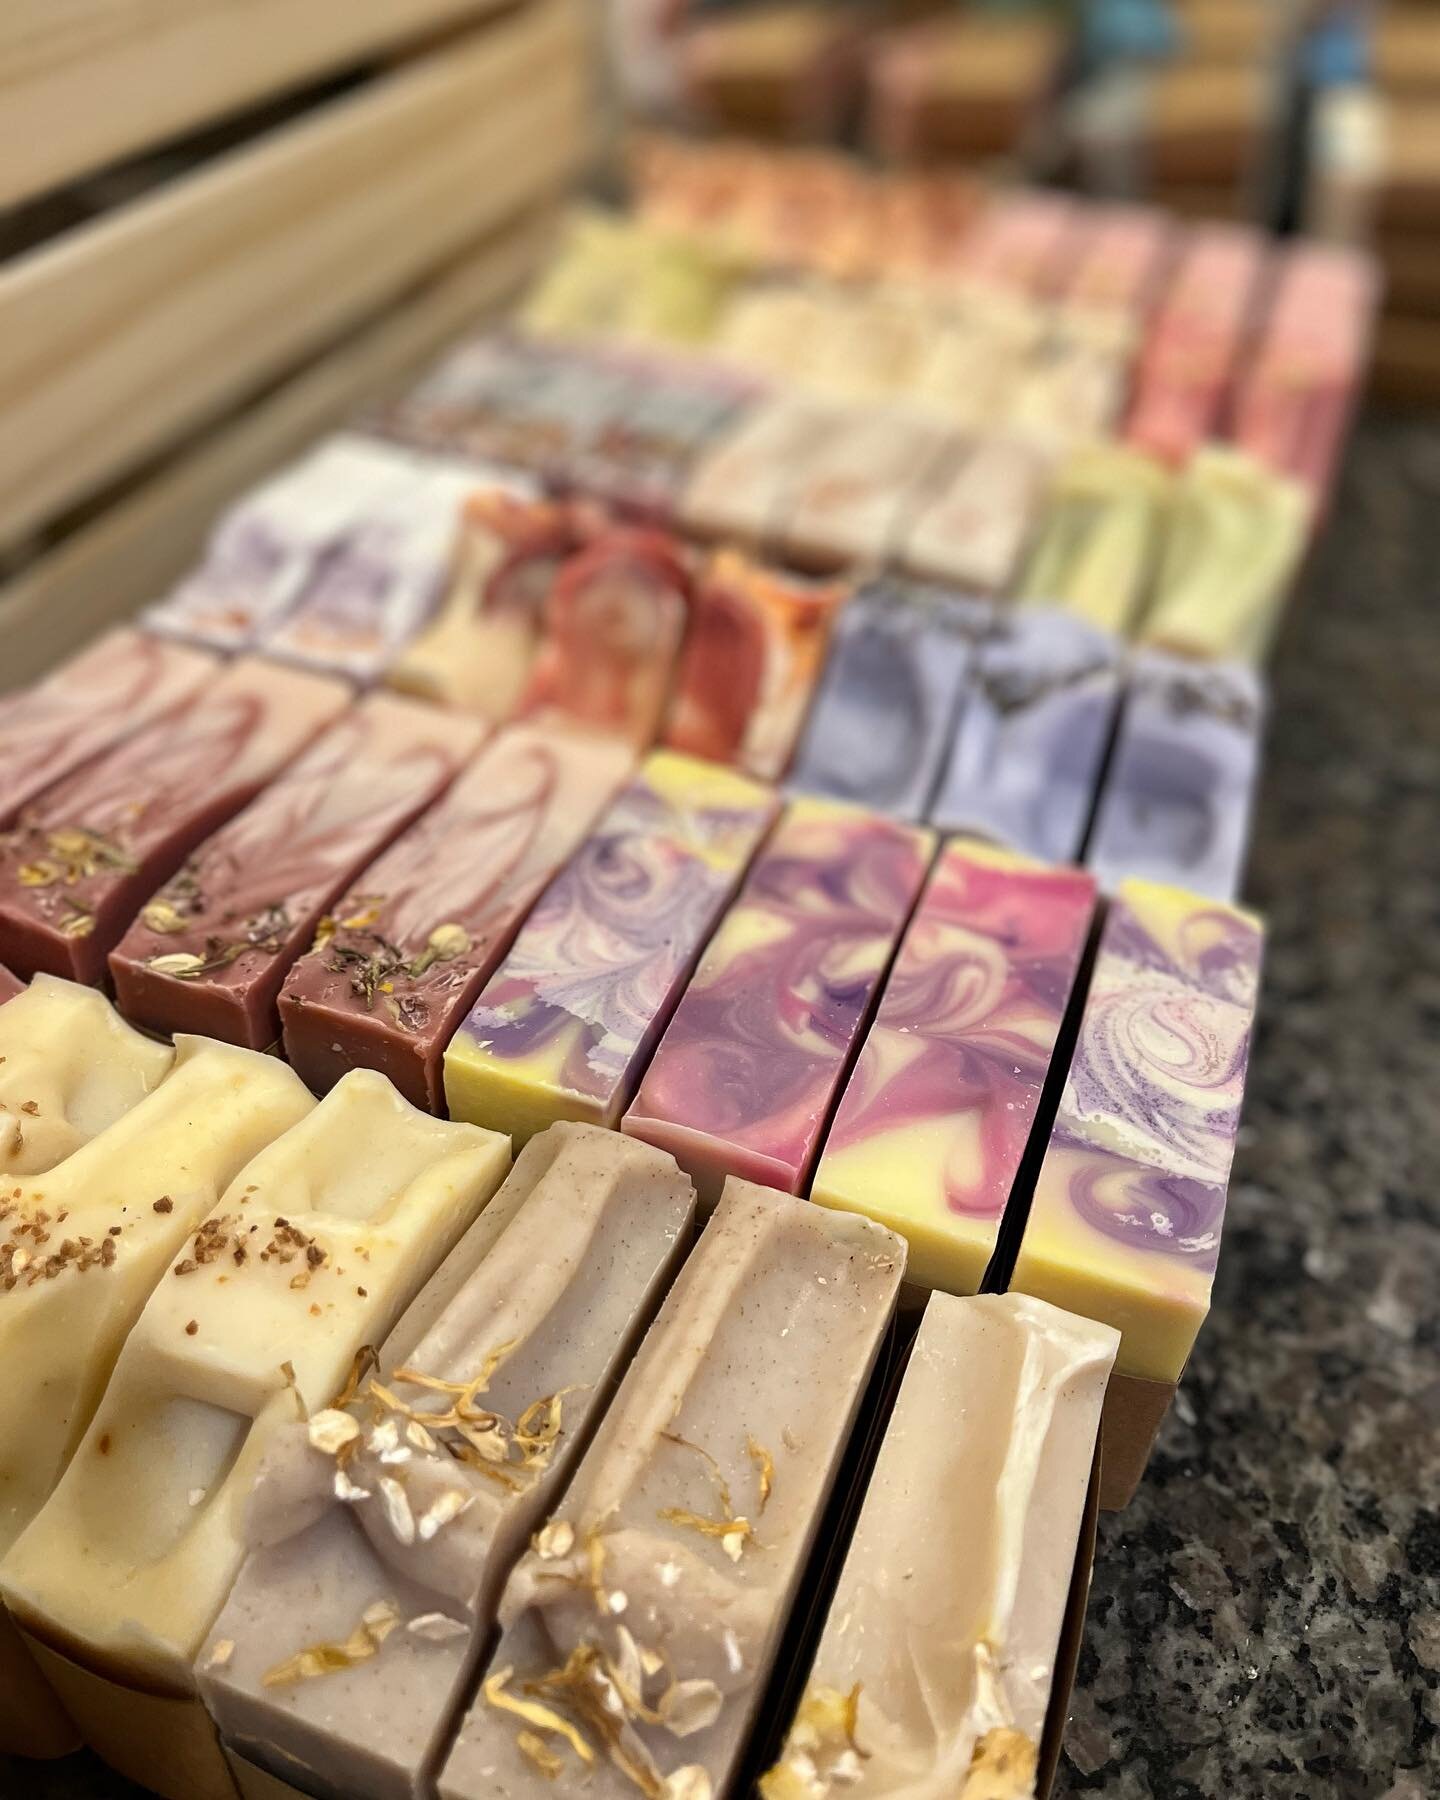 Restock for @bigyfoods in Marlborough! 😍

Keep an eye out for some more #foxglovesoapcompany products coming soon to Big Y! 🙌🏼😃 

#soap #handmadesoap #soapart #soaprestock #soaps #artisansoap #ilovesoap #bigy #restock #madeinct